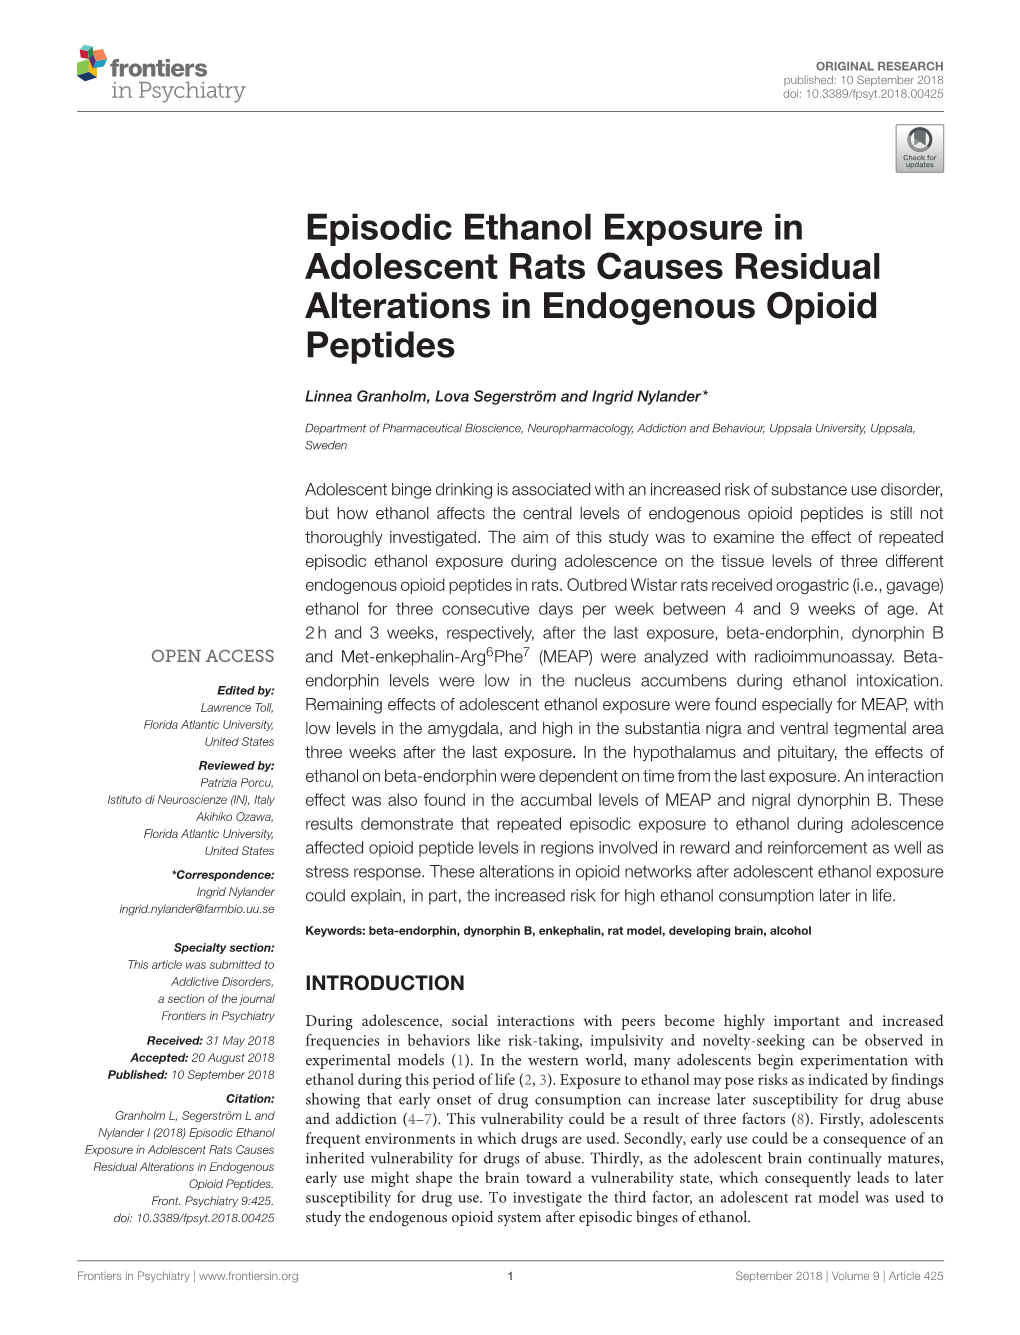 Episodic Ethanol Exposure in Adolescent Rats Causes Residual Alterations in Endogenous Opioid Peptides